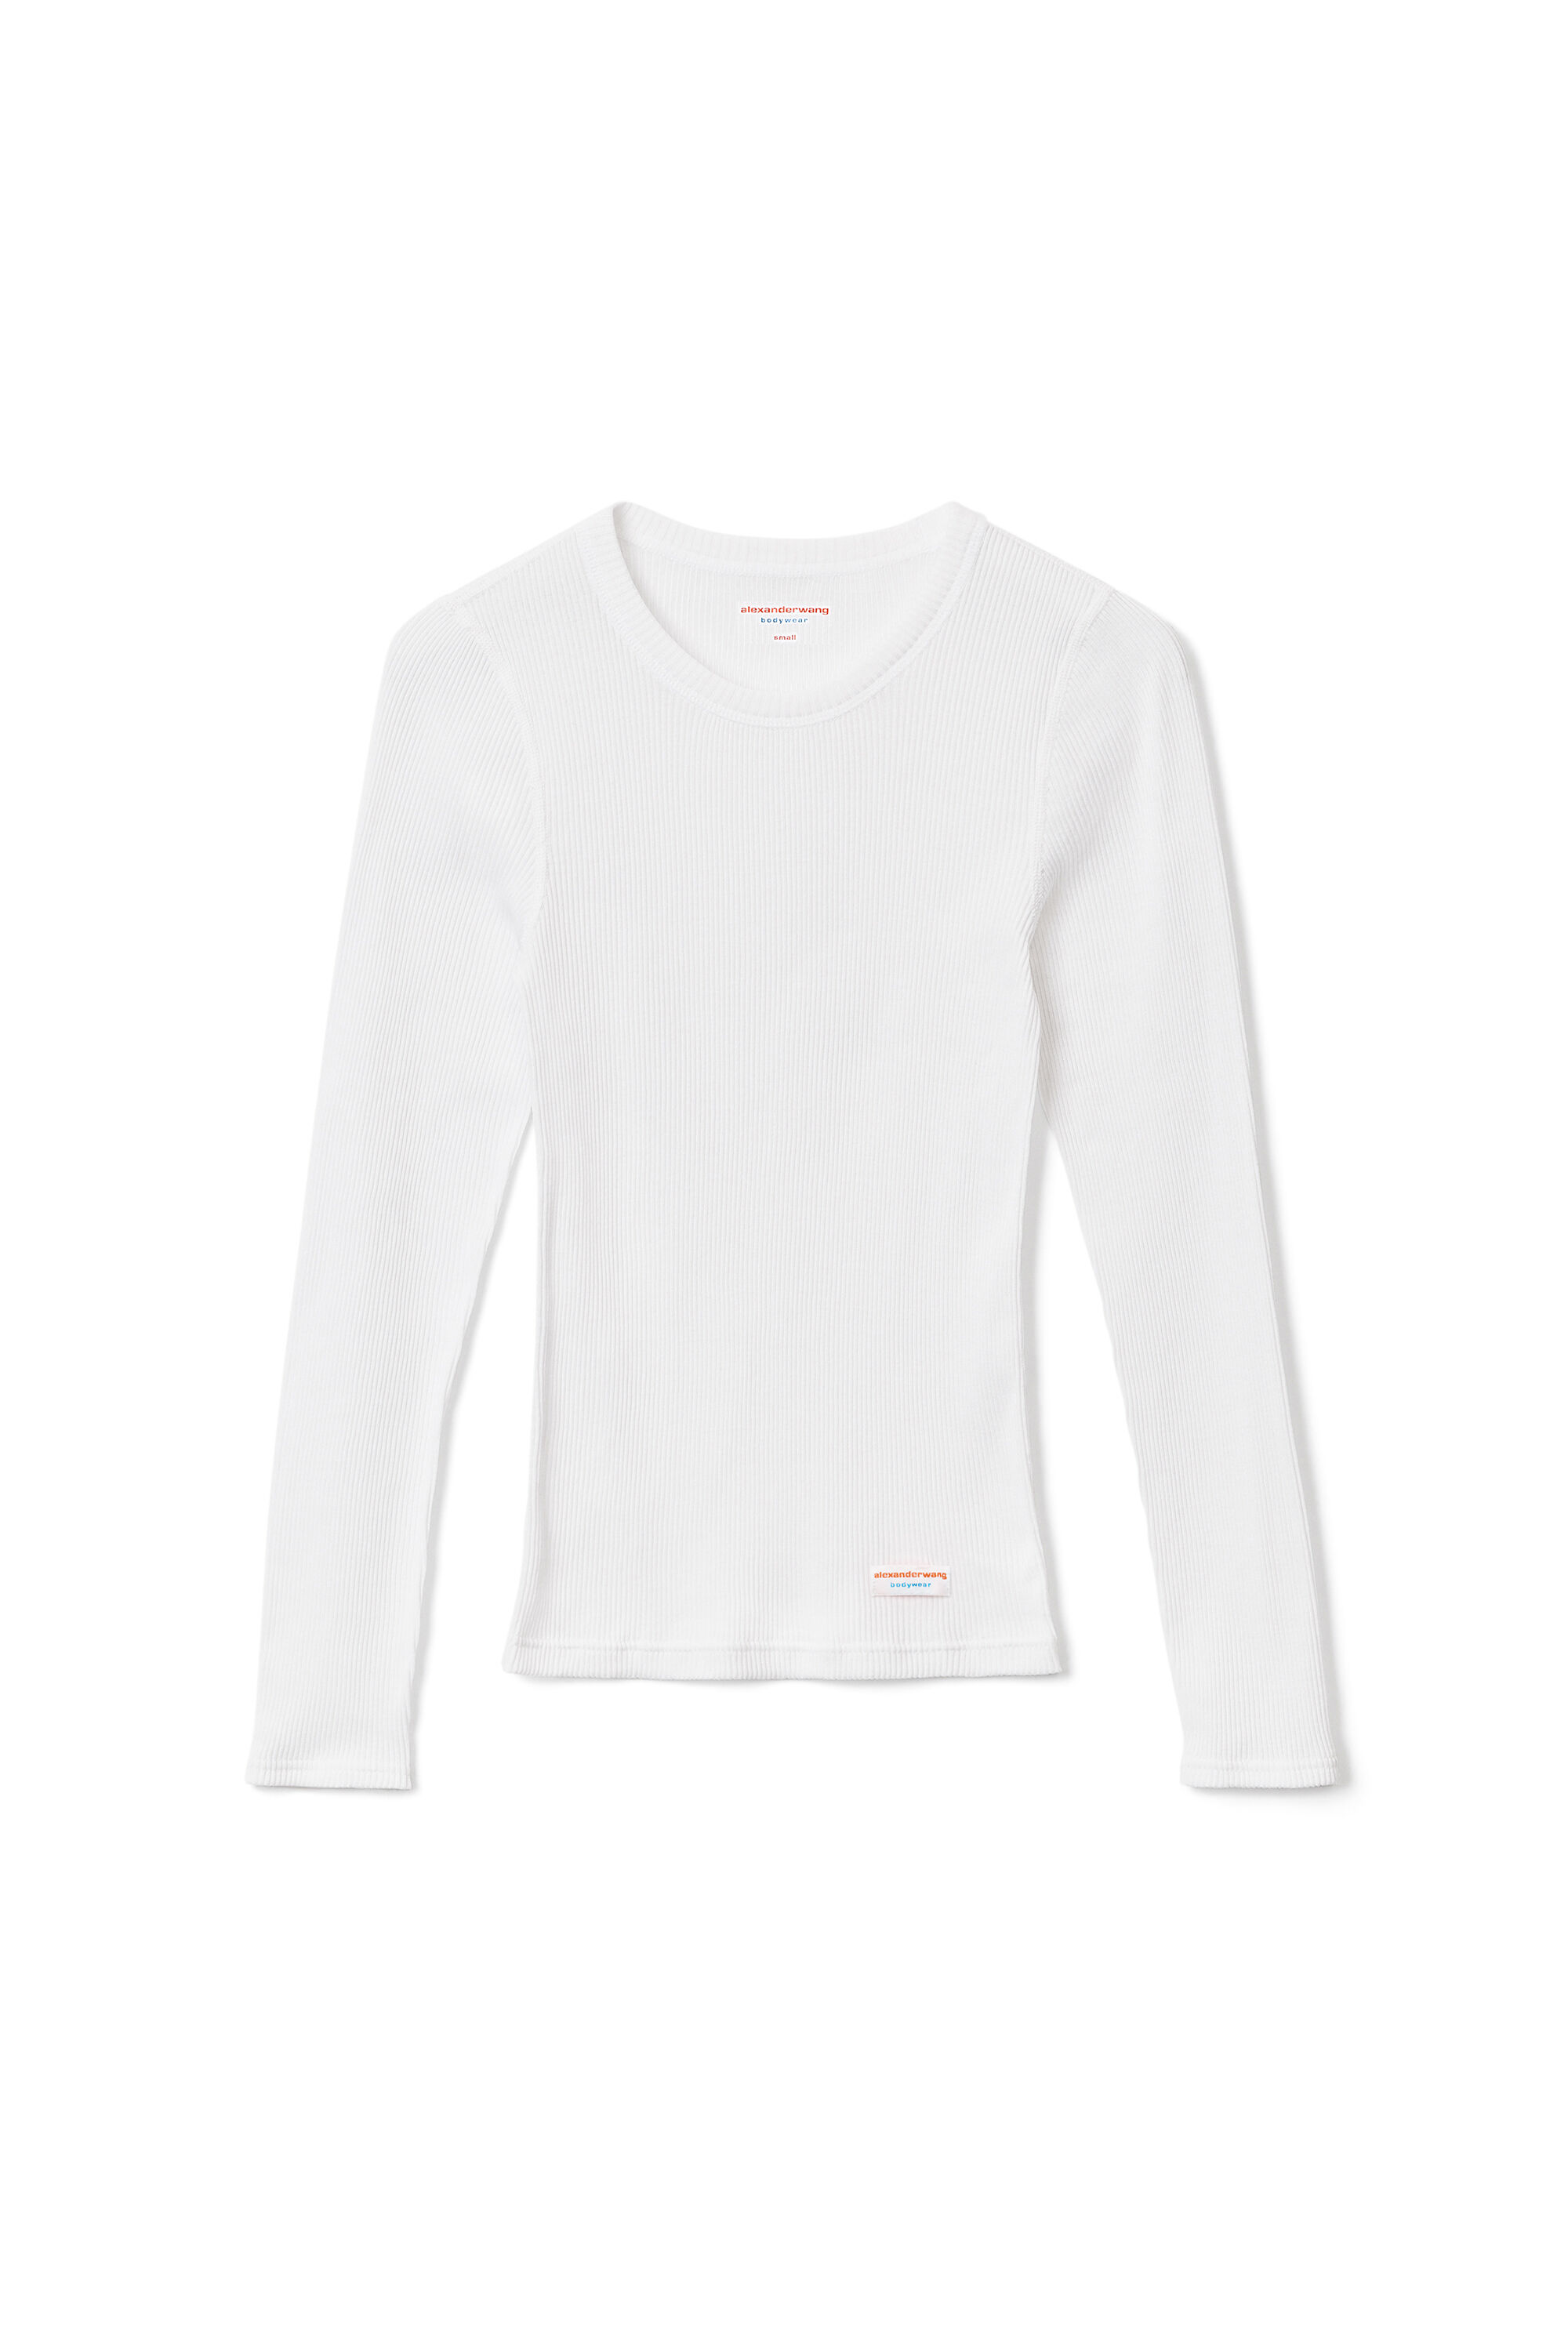 Long-Sleeve Tee in Ribbed Cotton Jersey in WHITE | alexanderwang®